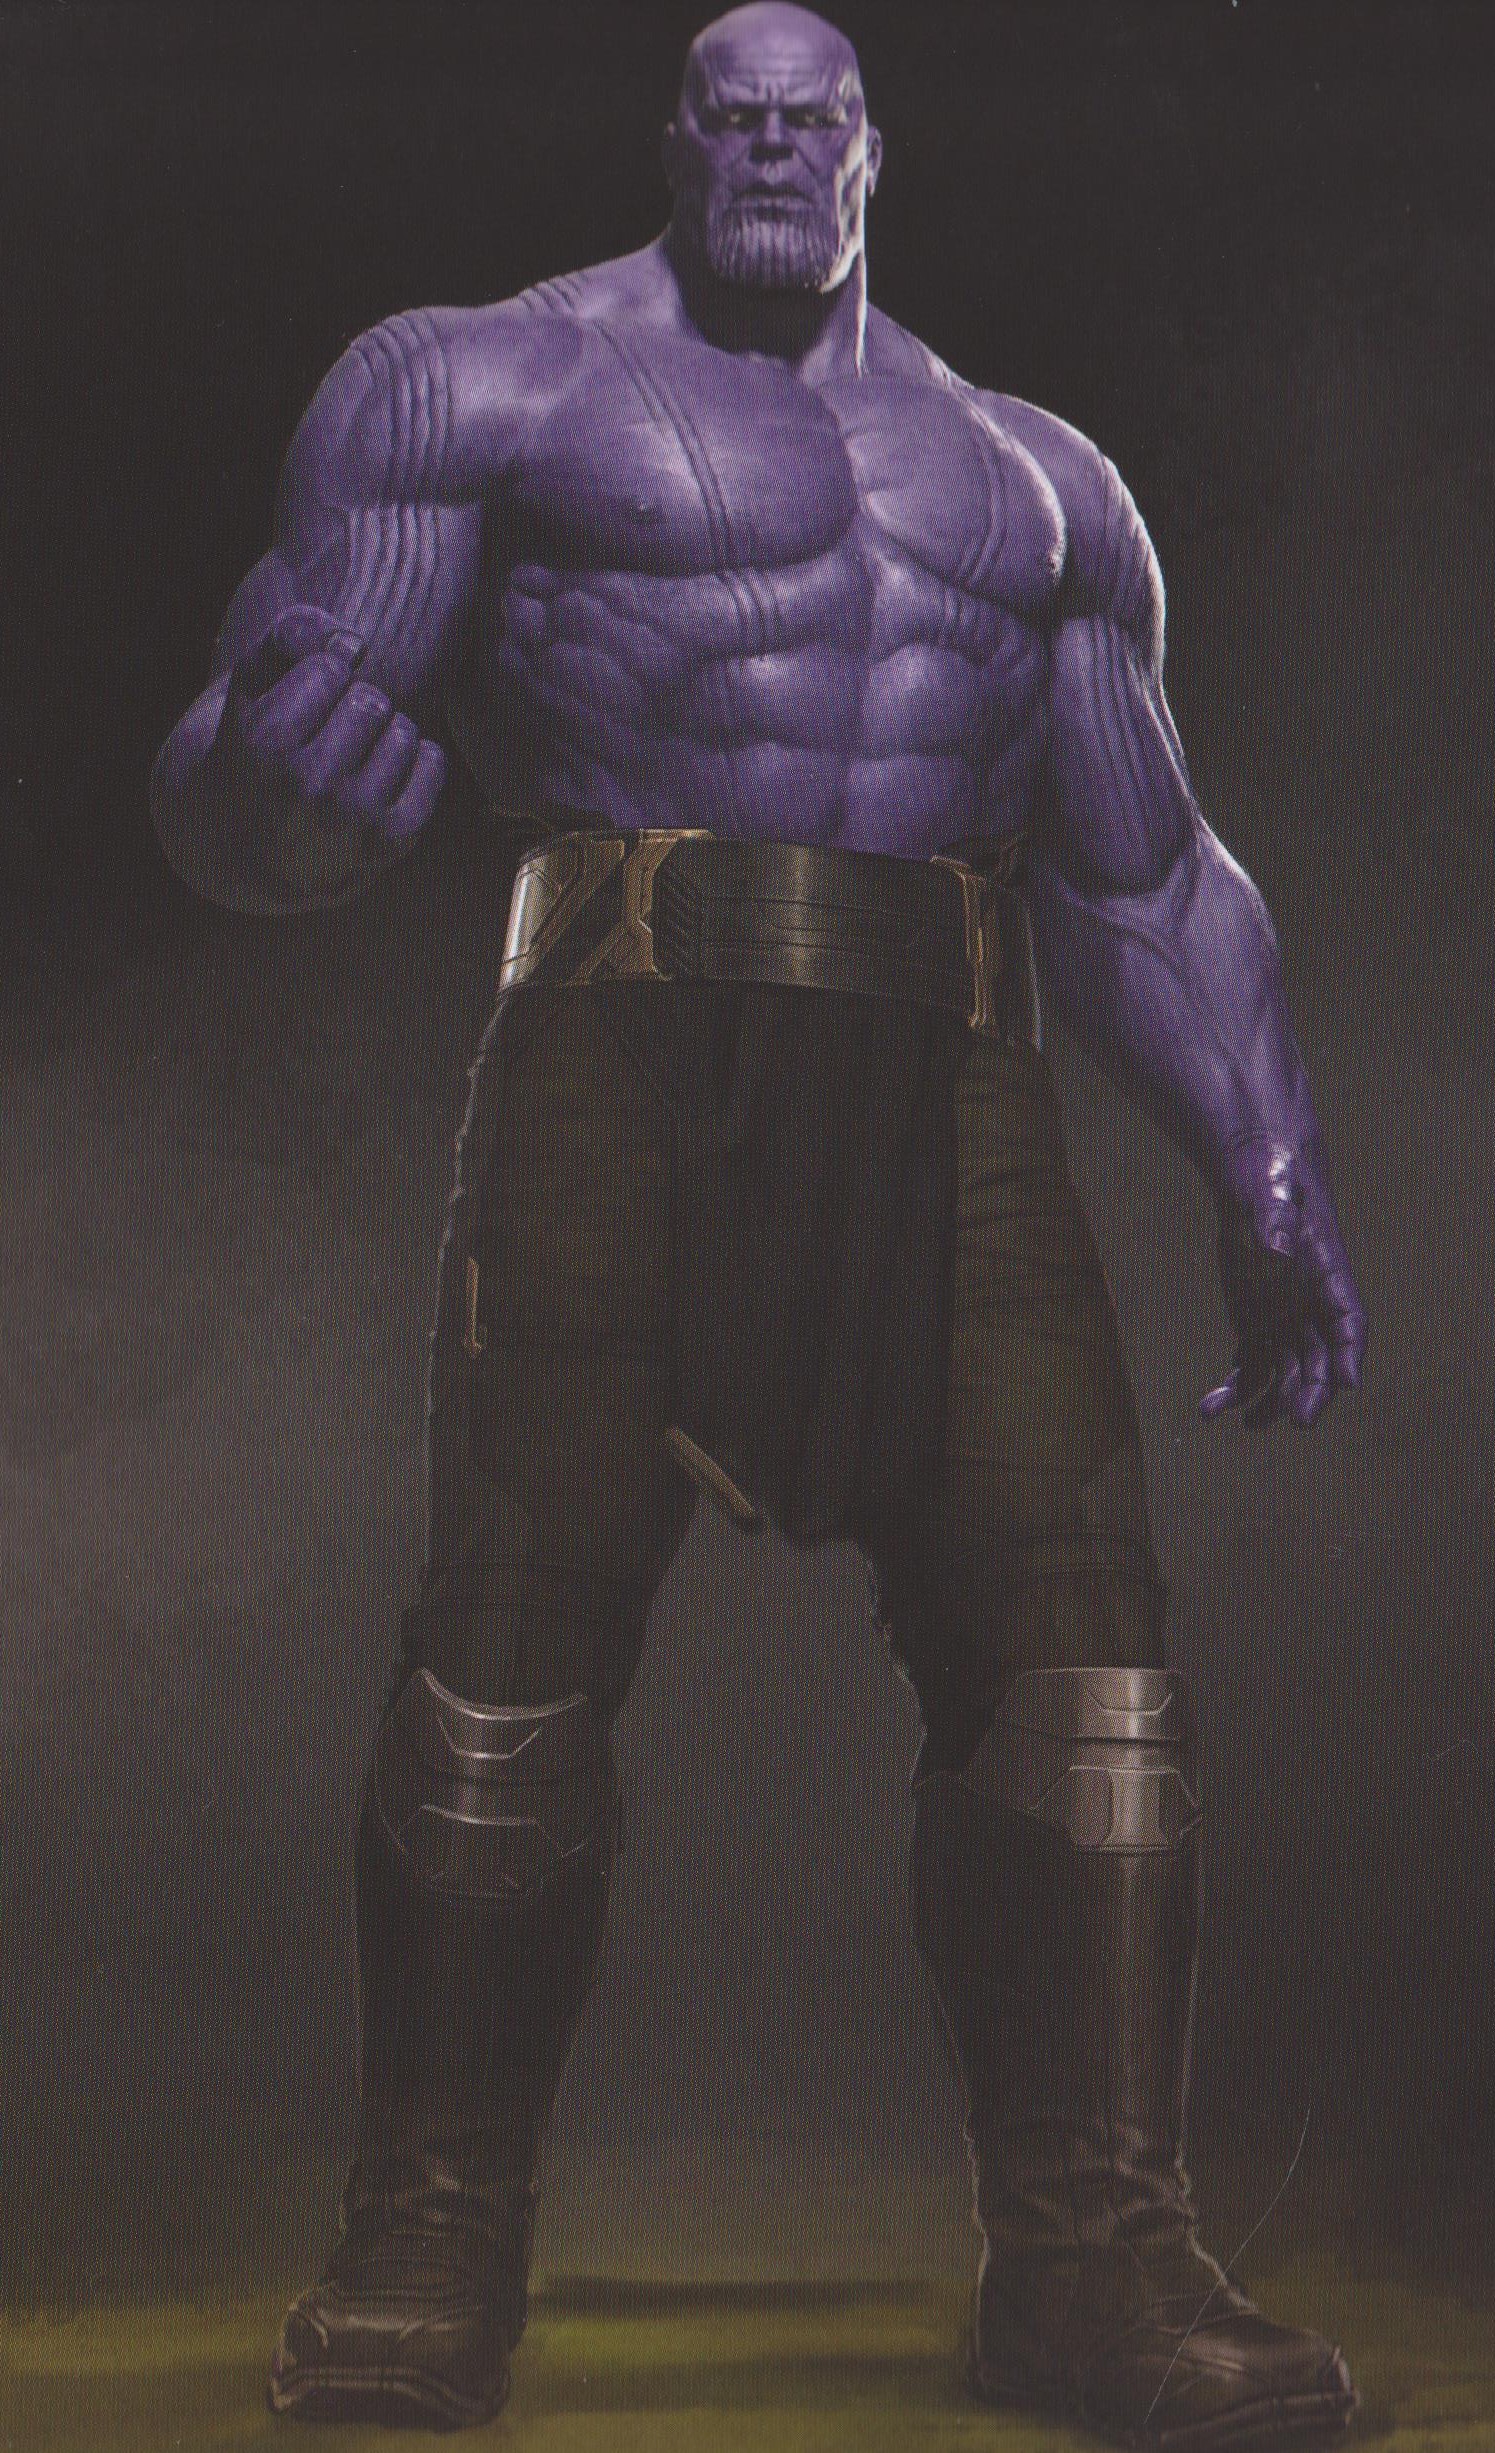 AVENGERS INFINITY WAR Hi Res Concept Art Sees The Mad Titan Thanos